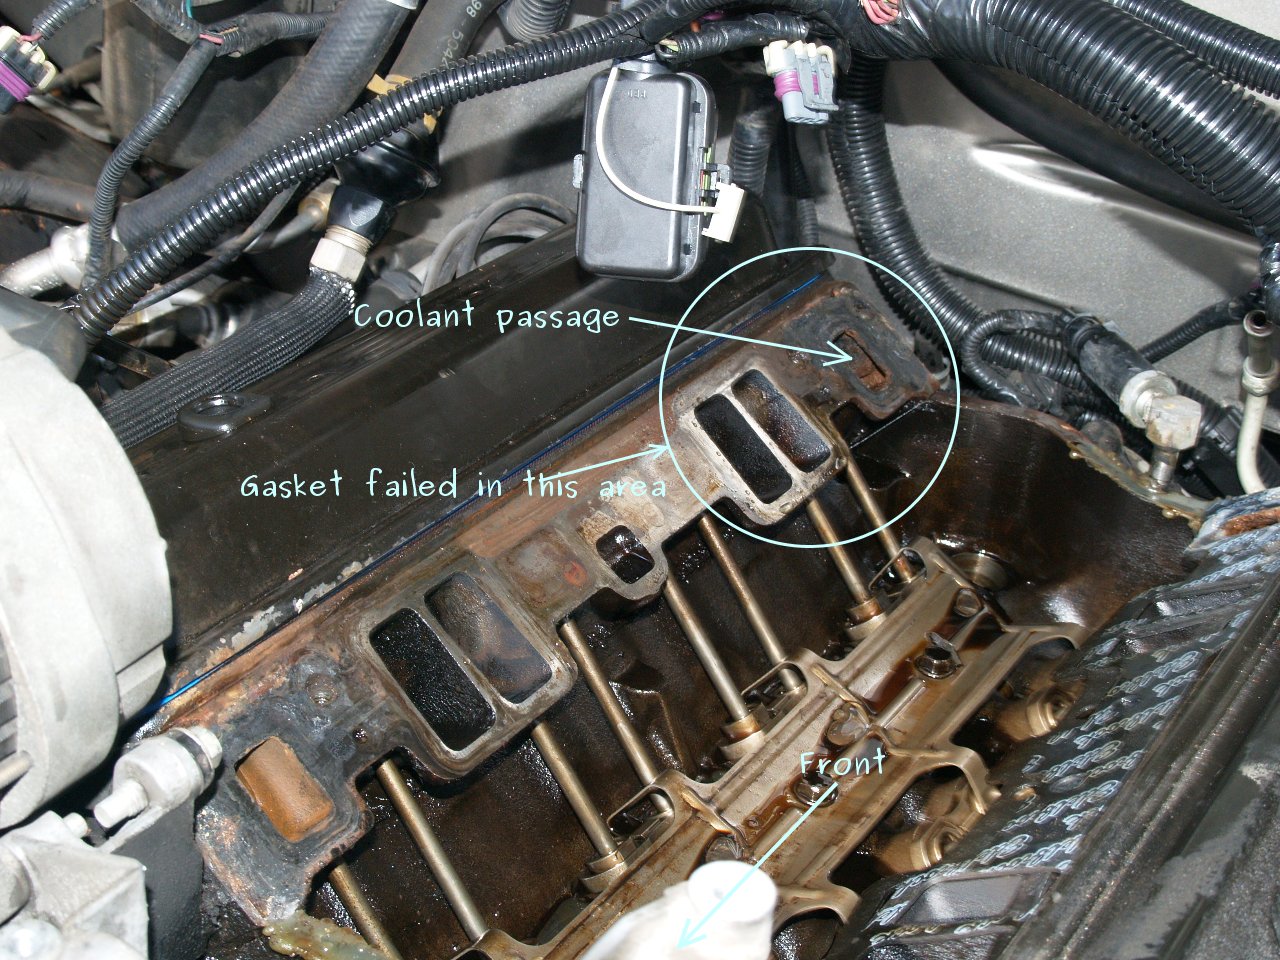 See P0196 in engine